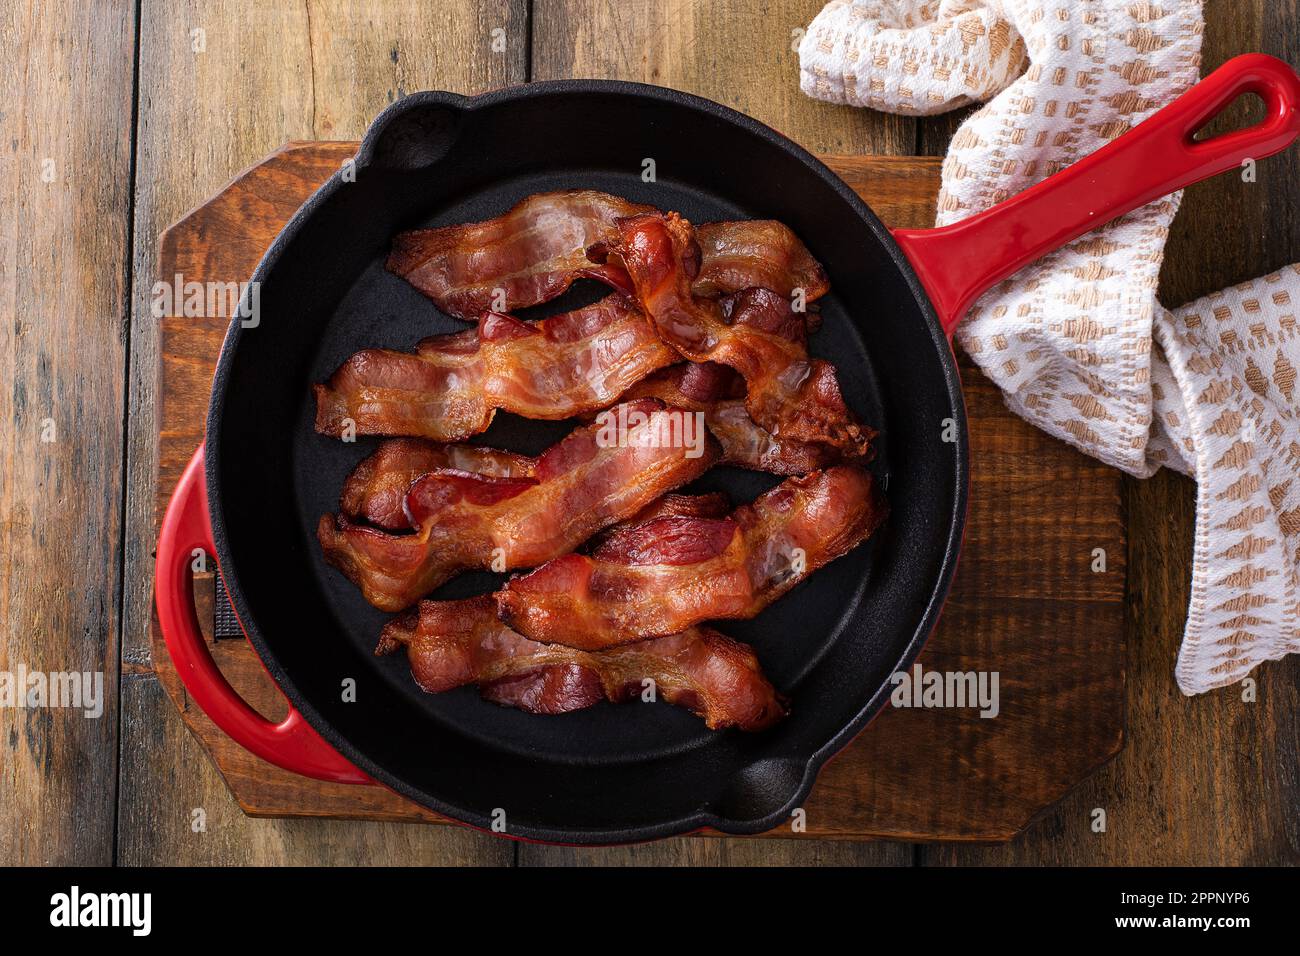 https://c8.alamy.com/comp/2PPNYP6/cooked-bacon-in-a-cast-iron-pan-ready-to-eat-breakfast-staple-2PPNYP6.jpg